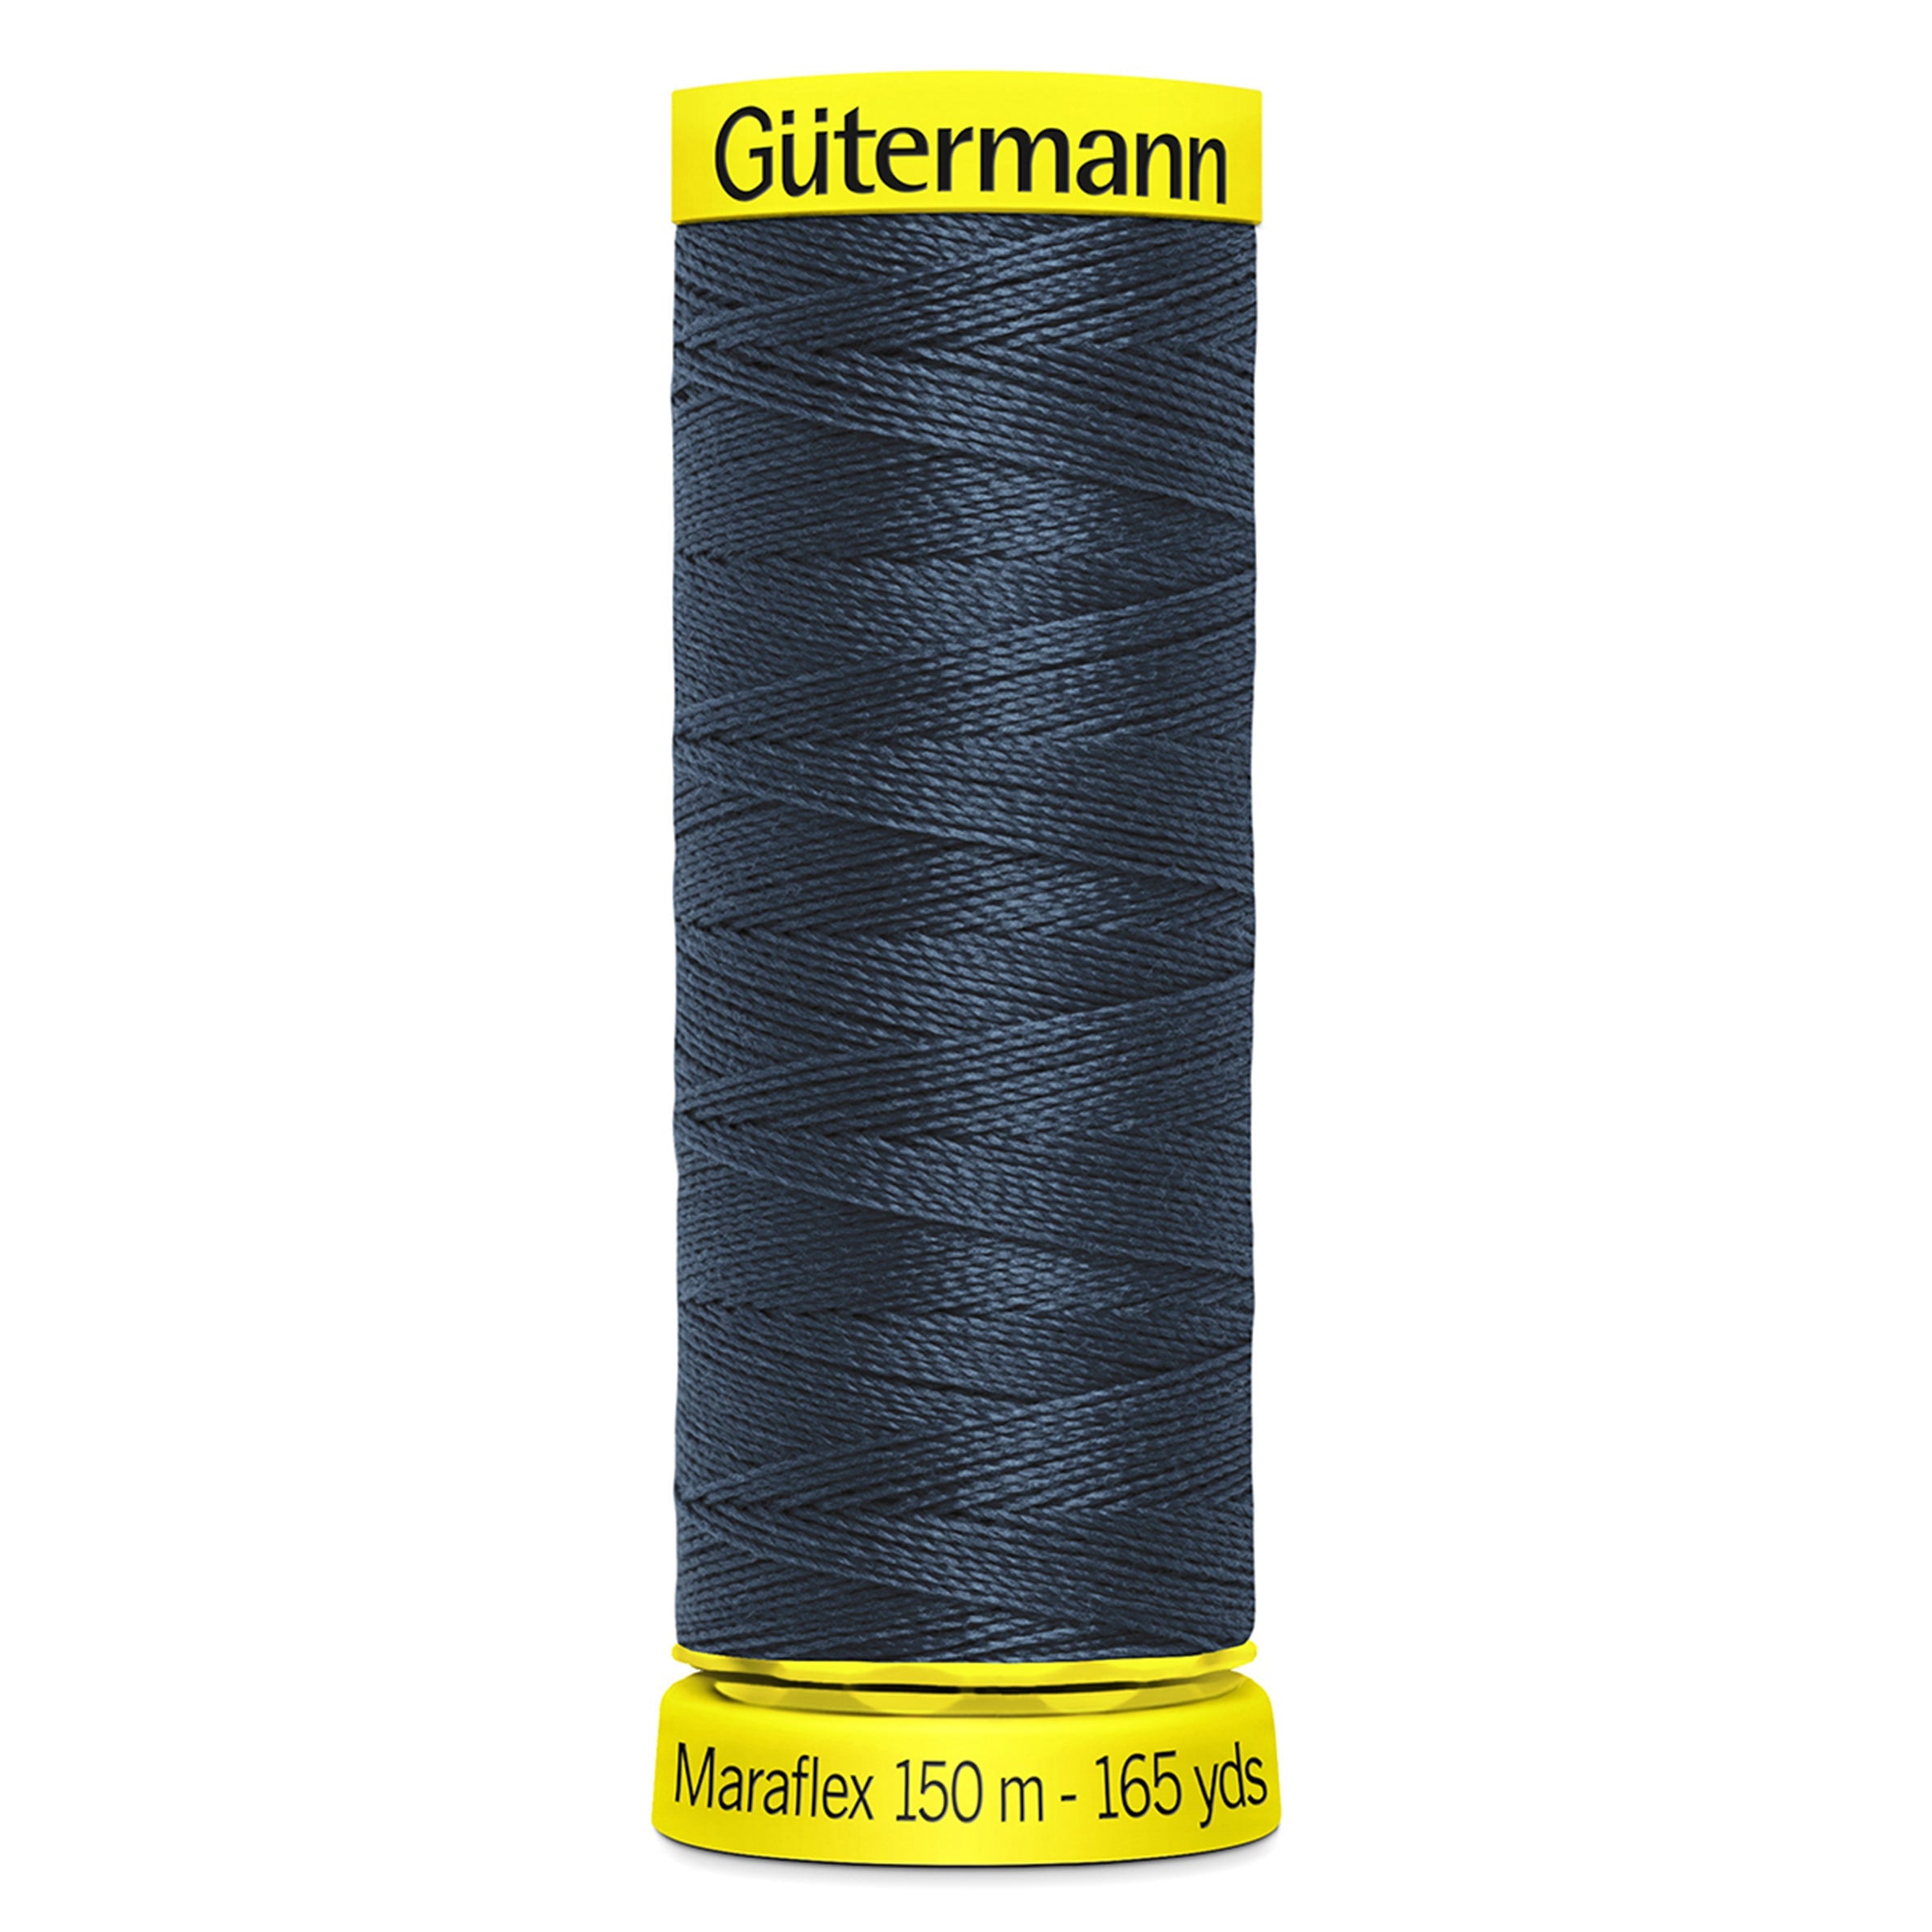 Gutermann Maraflex Stretchy Sewing Thread 150m colour 339 from Jaycotts Sewing Supplies